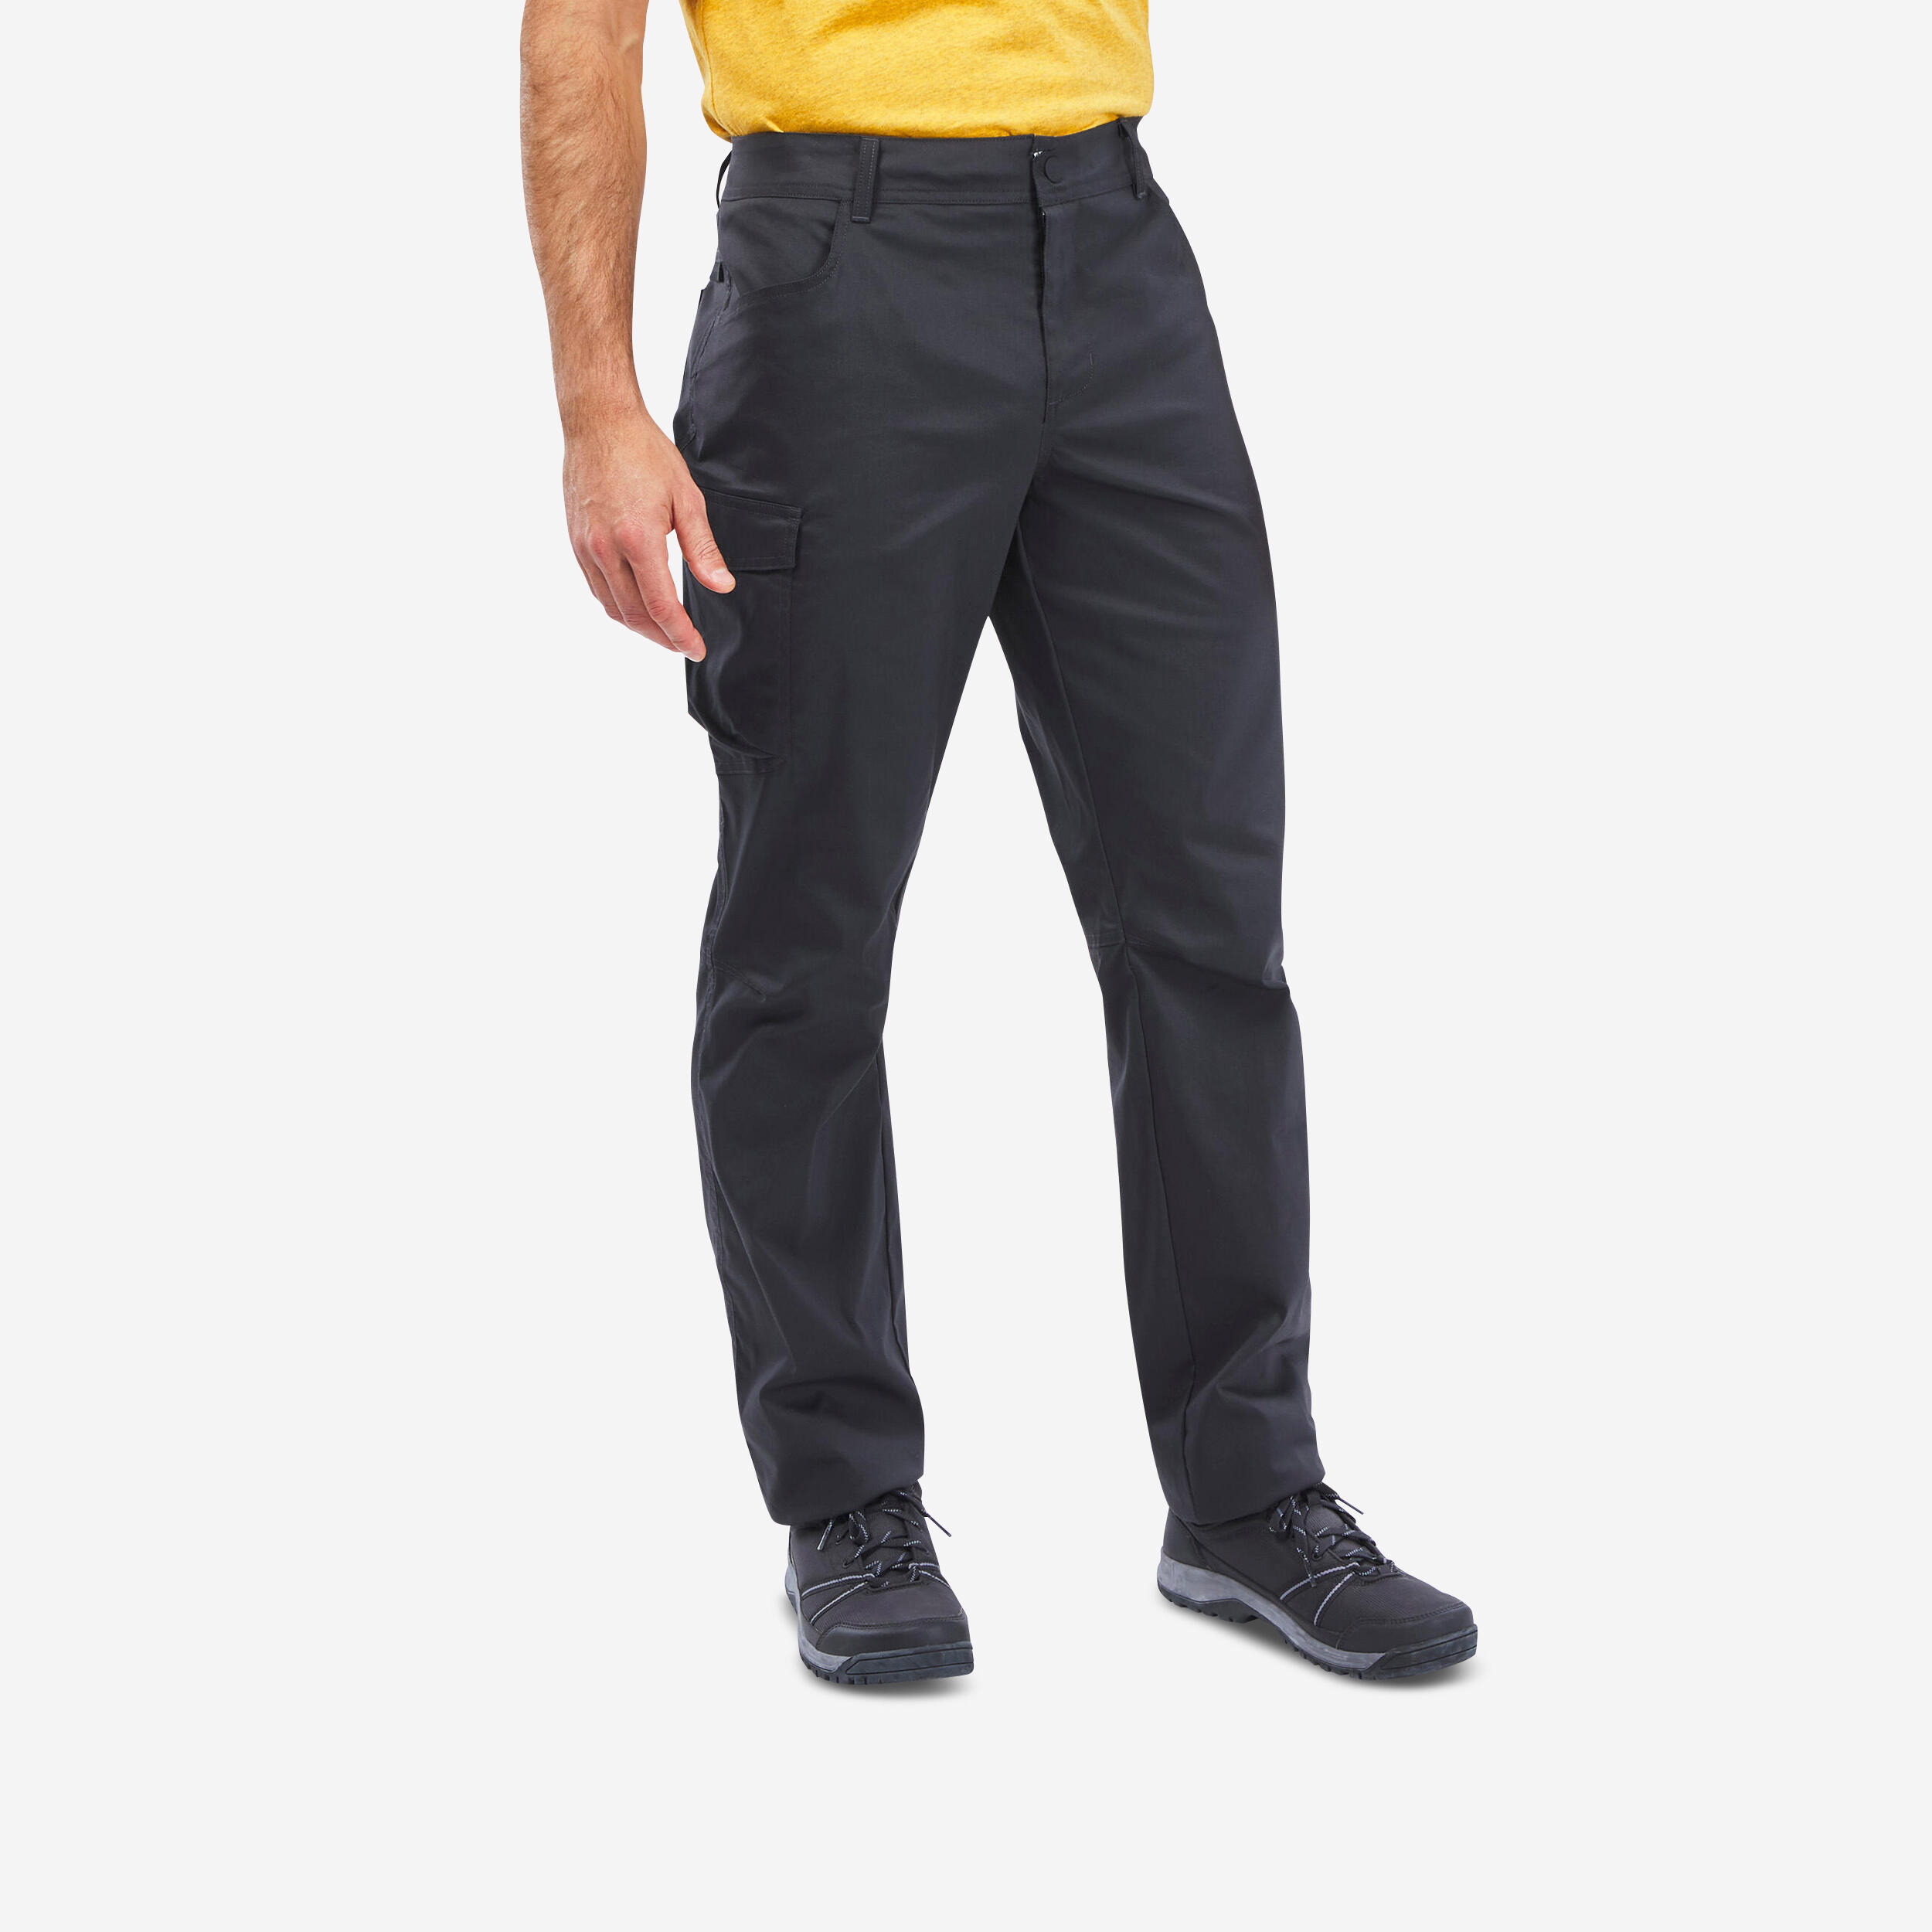 Buy Quechua Men's Hiking Pants MH550 (Modular) - Grey (38) Online at Low  Prices in India - Amazon.in